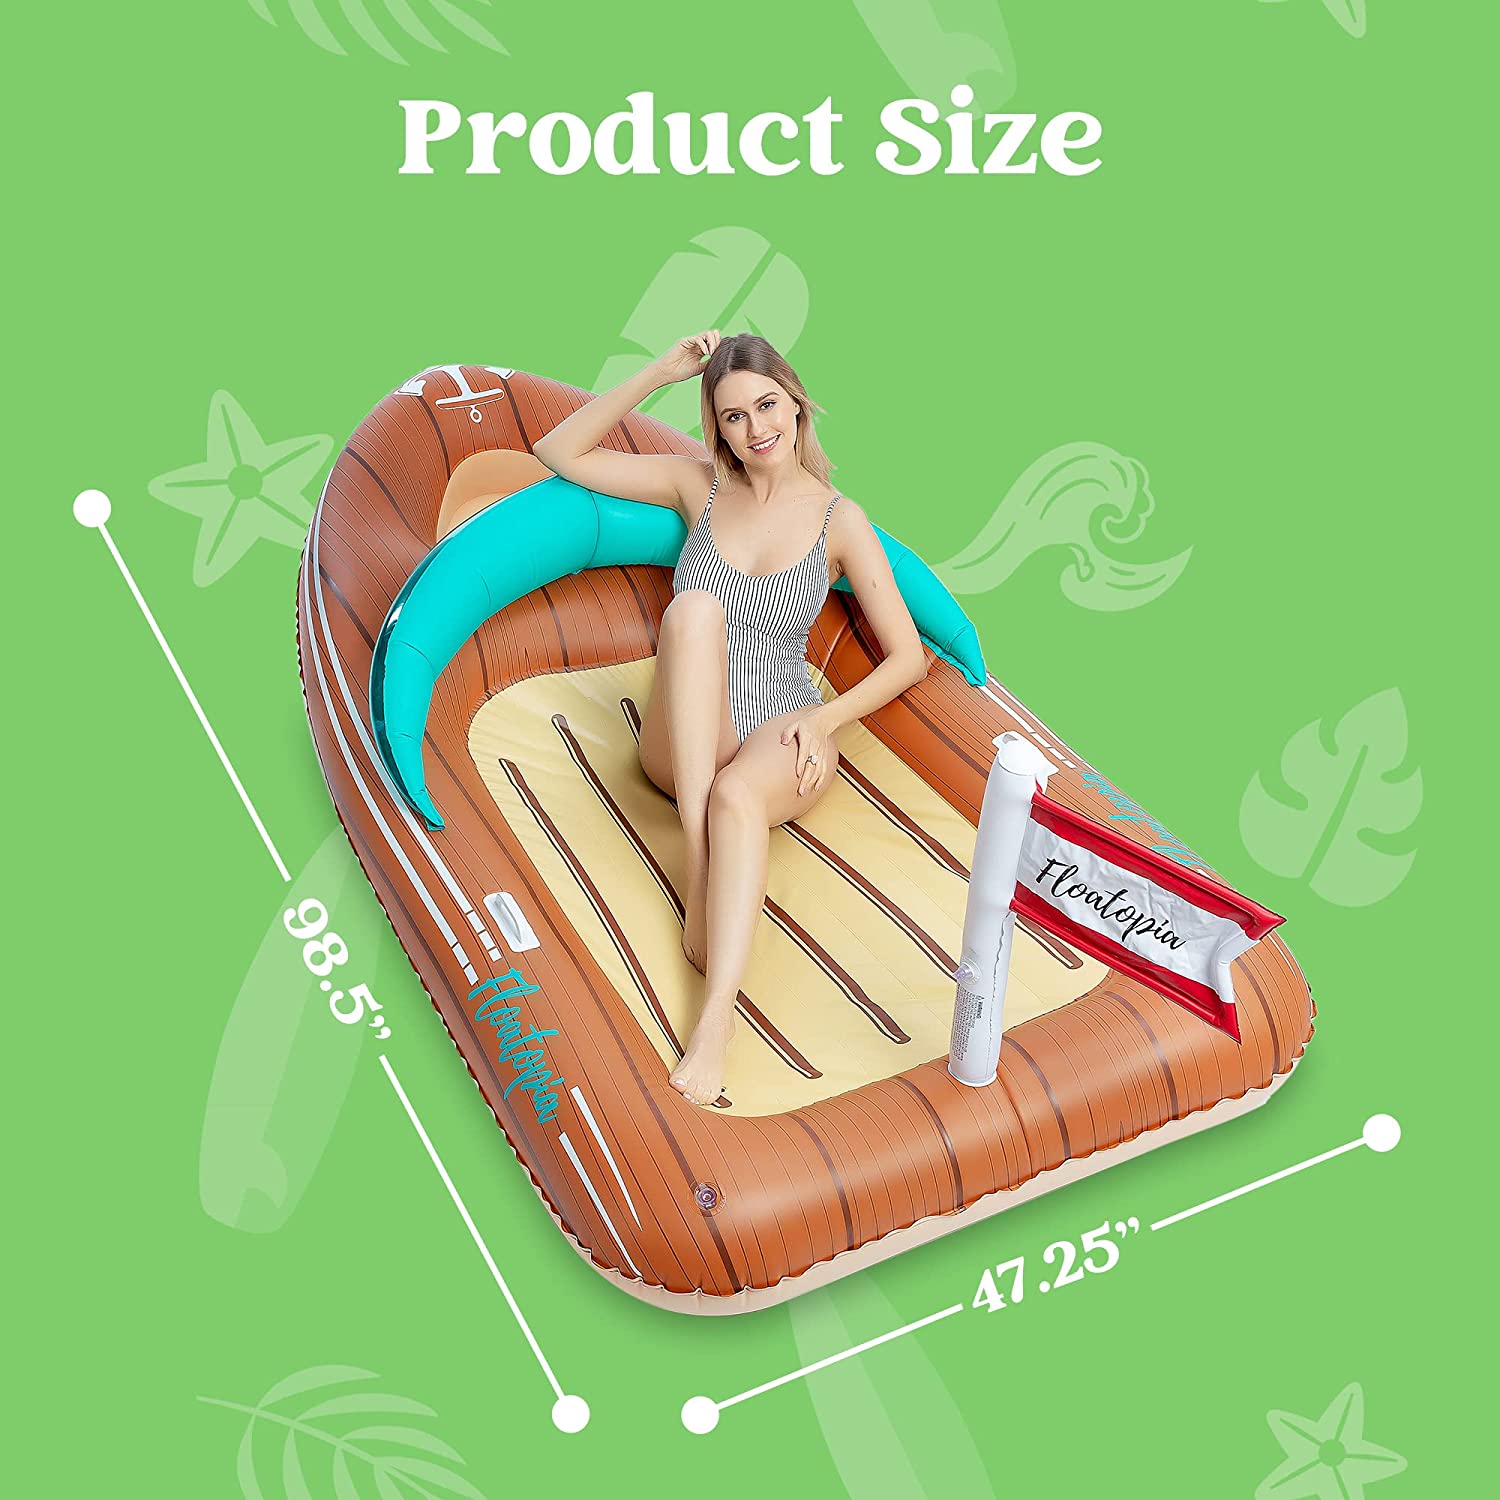 SLOOSH - Inflatable Boat Pool Float with Reinforced Cooler